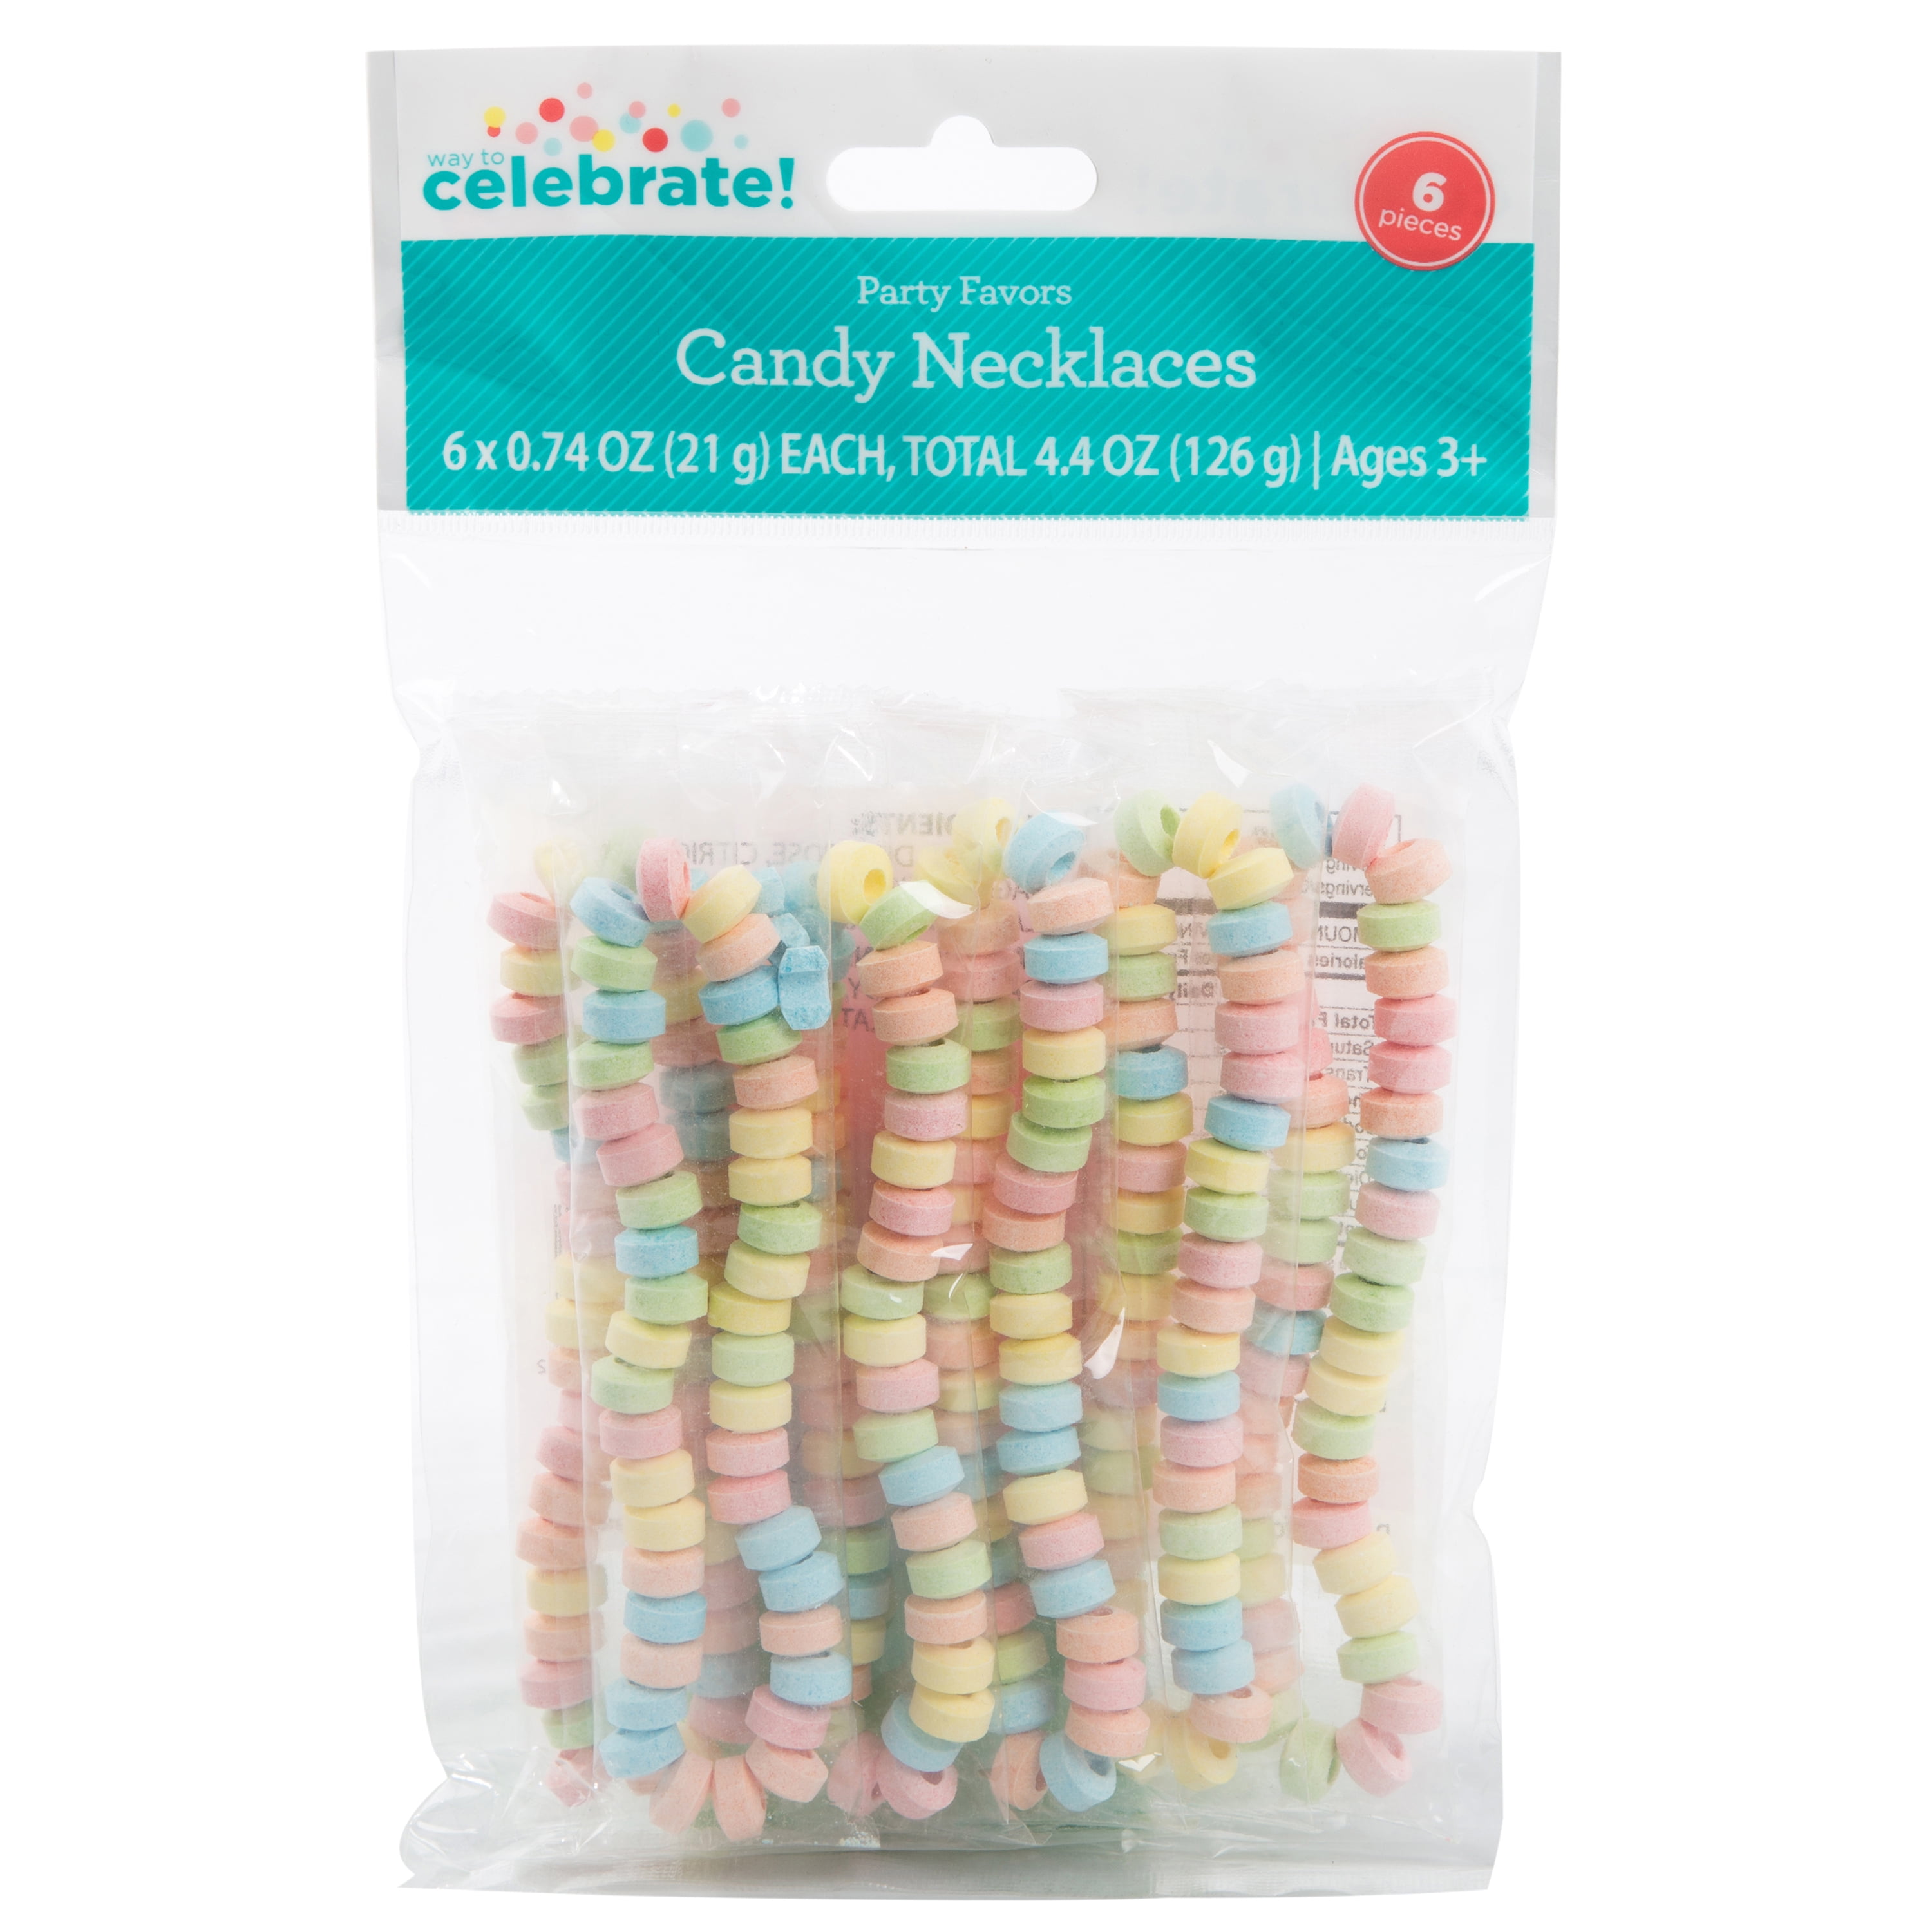 Make Your Own Candy Necklace and Cupcake Popping Candy – Party Favors,  Candy Handouts, Candy Crafts – 12 Candy Necklace Kits and 50 Cupcake  Popping Candy Packs, Slumber Party Supplies for Girls